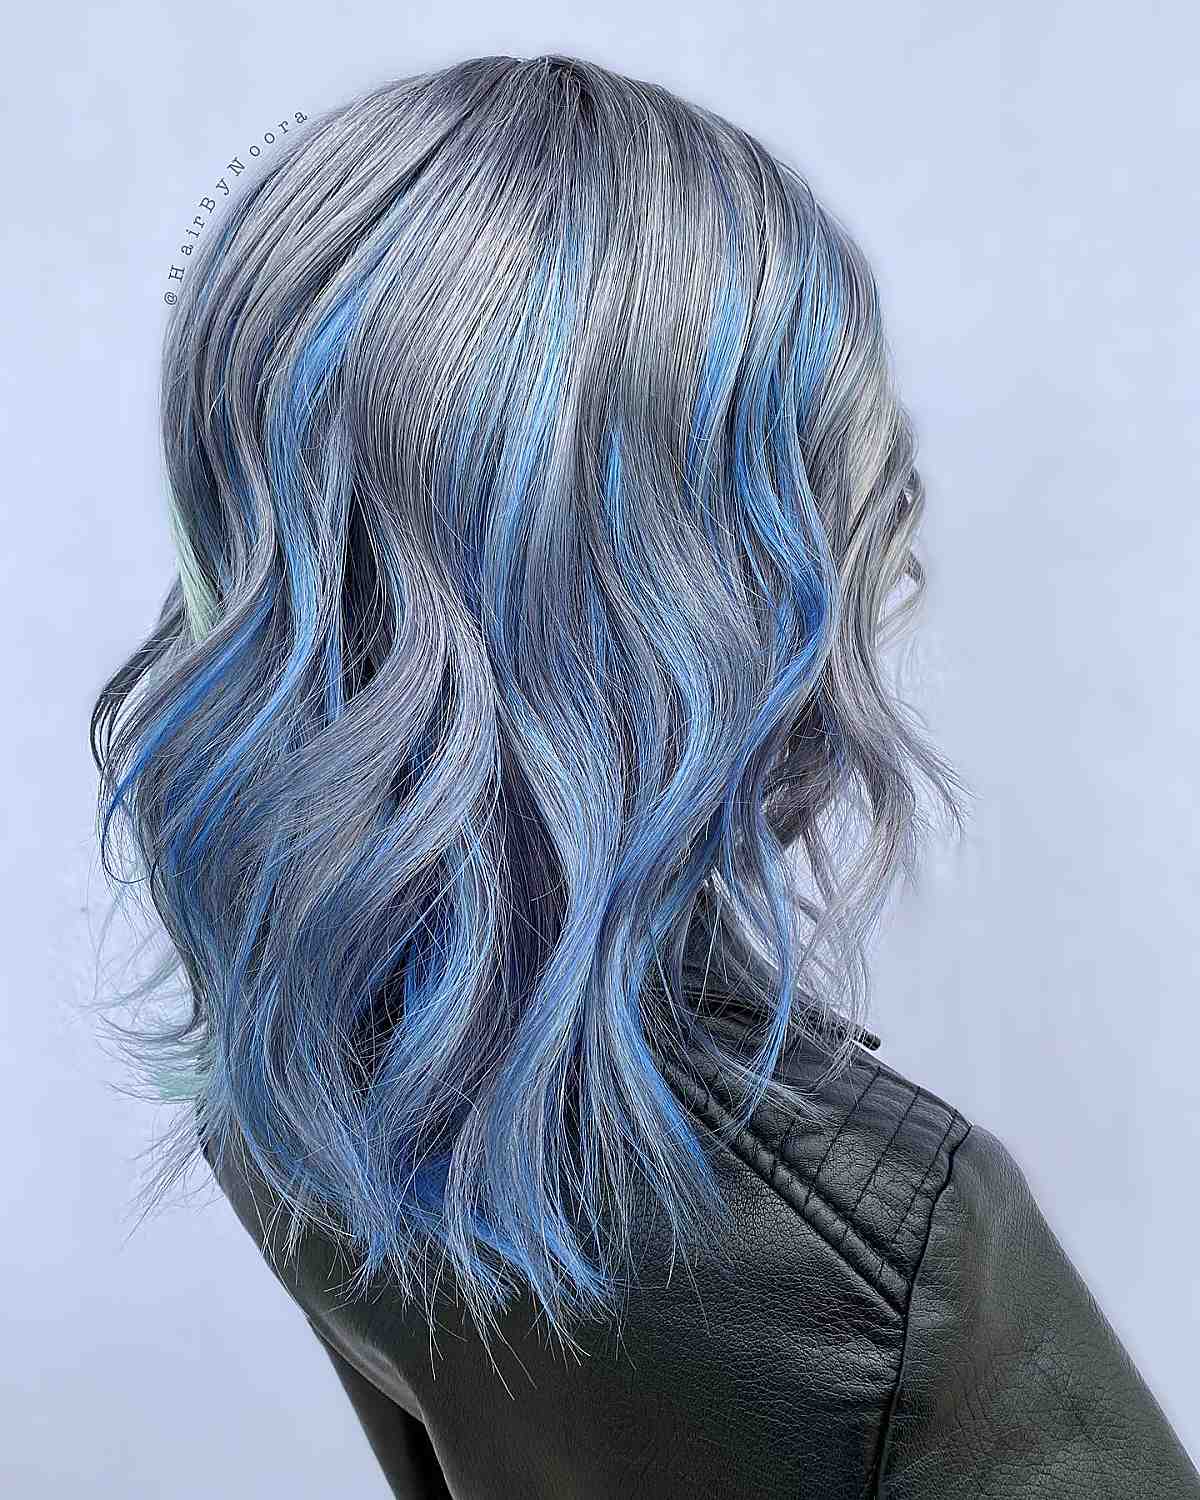 Remarkable unicorn silver and blue hair